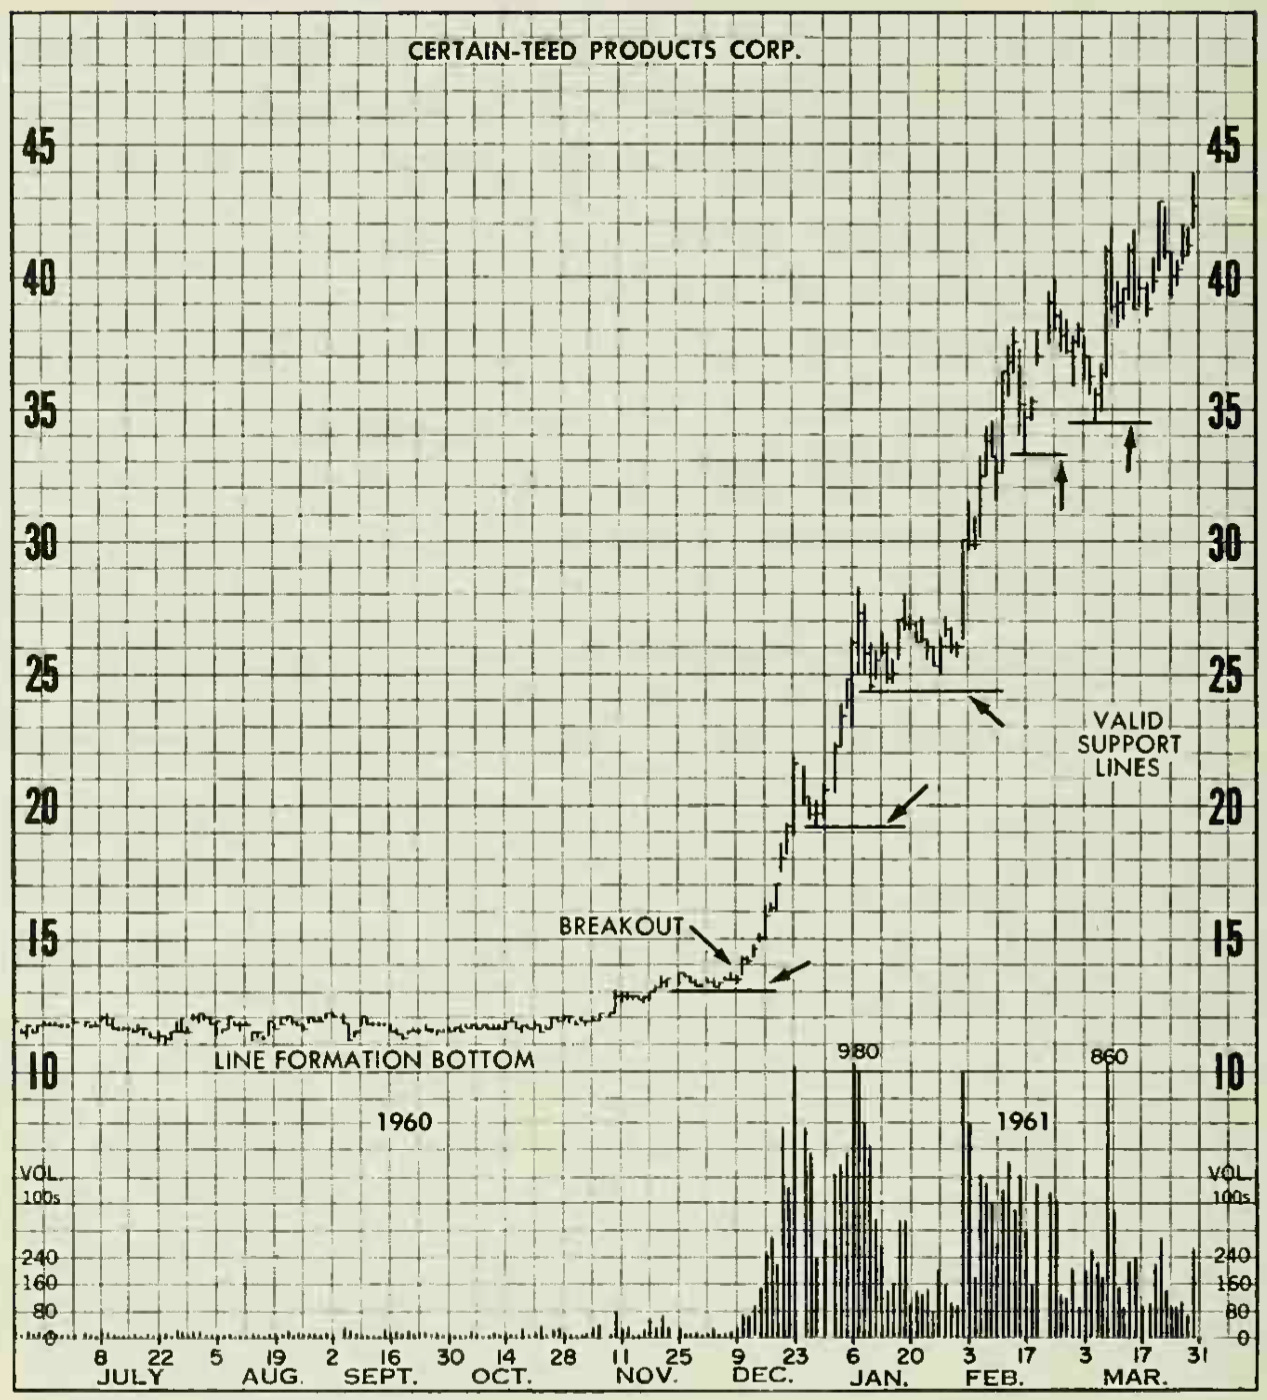 Example from Certain-teed Product Flat Base breakout from 1960